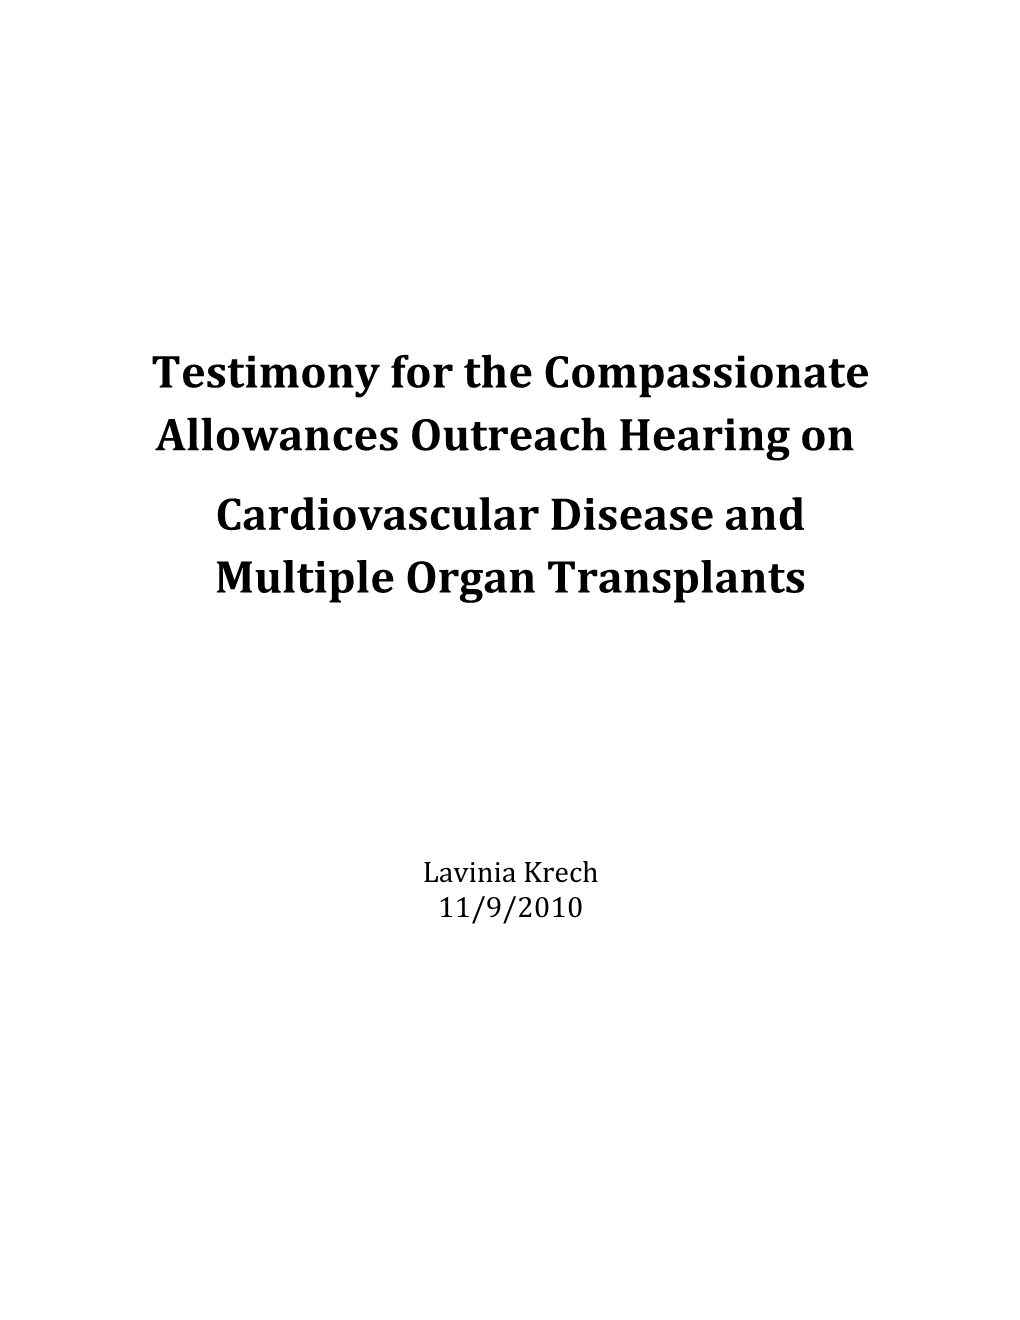 Testimony for the Compassionate Allowances Outreach Hearing on Cardiovascular Disease And